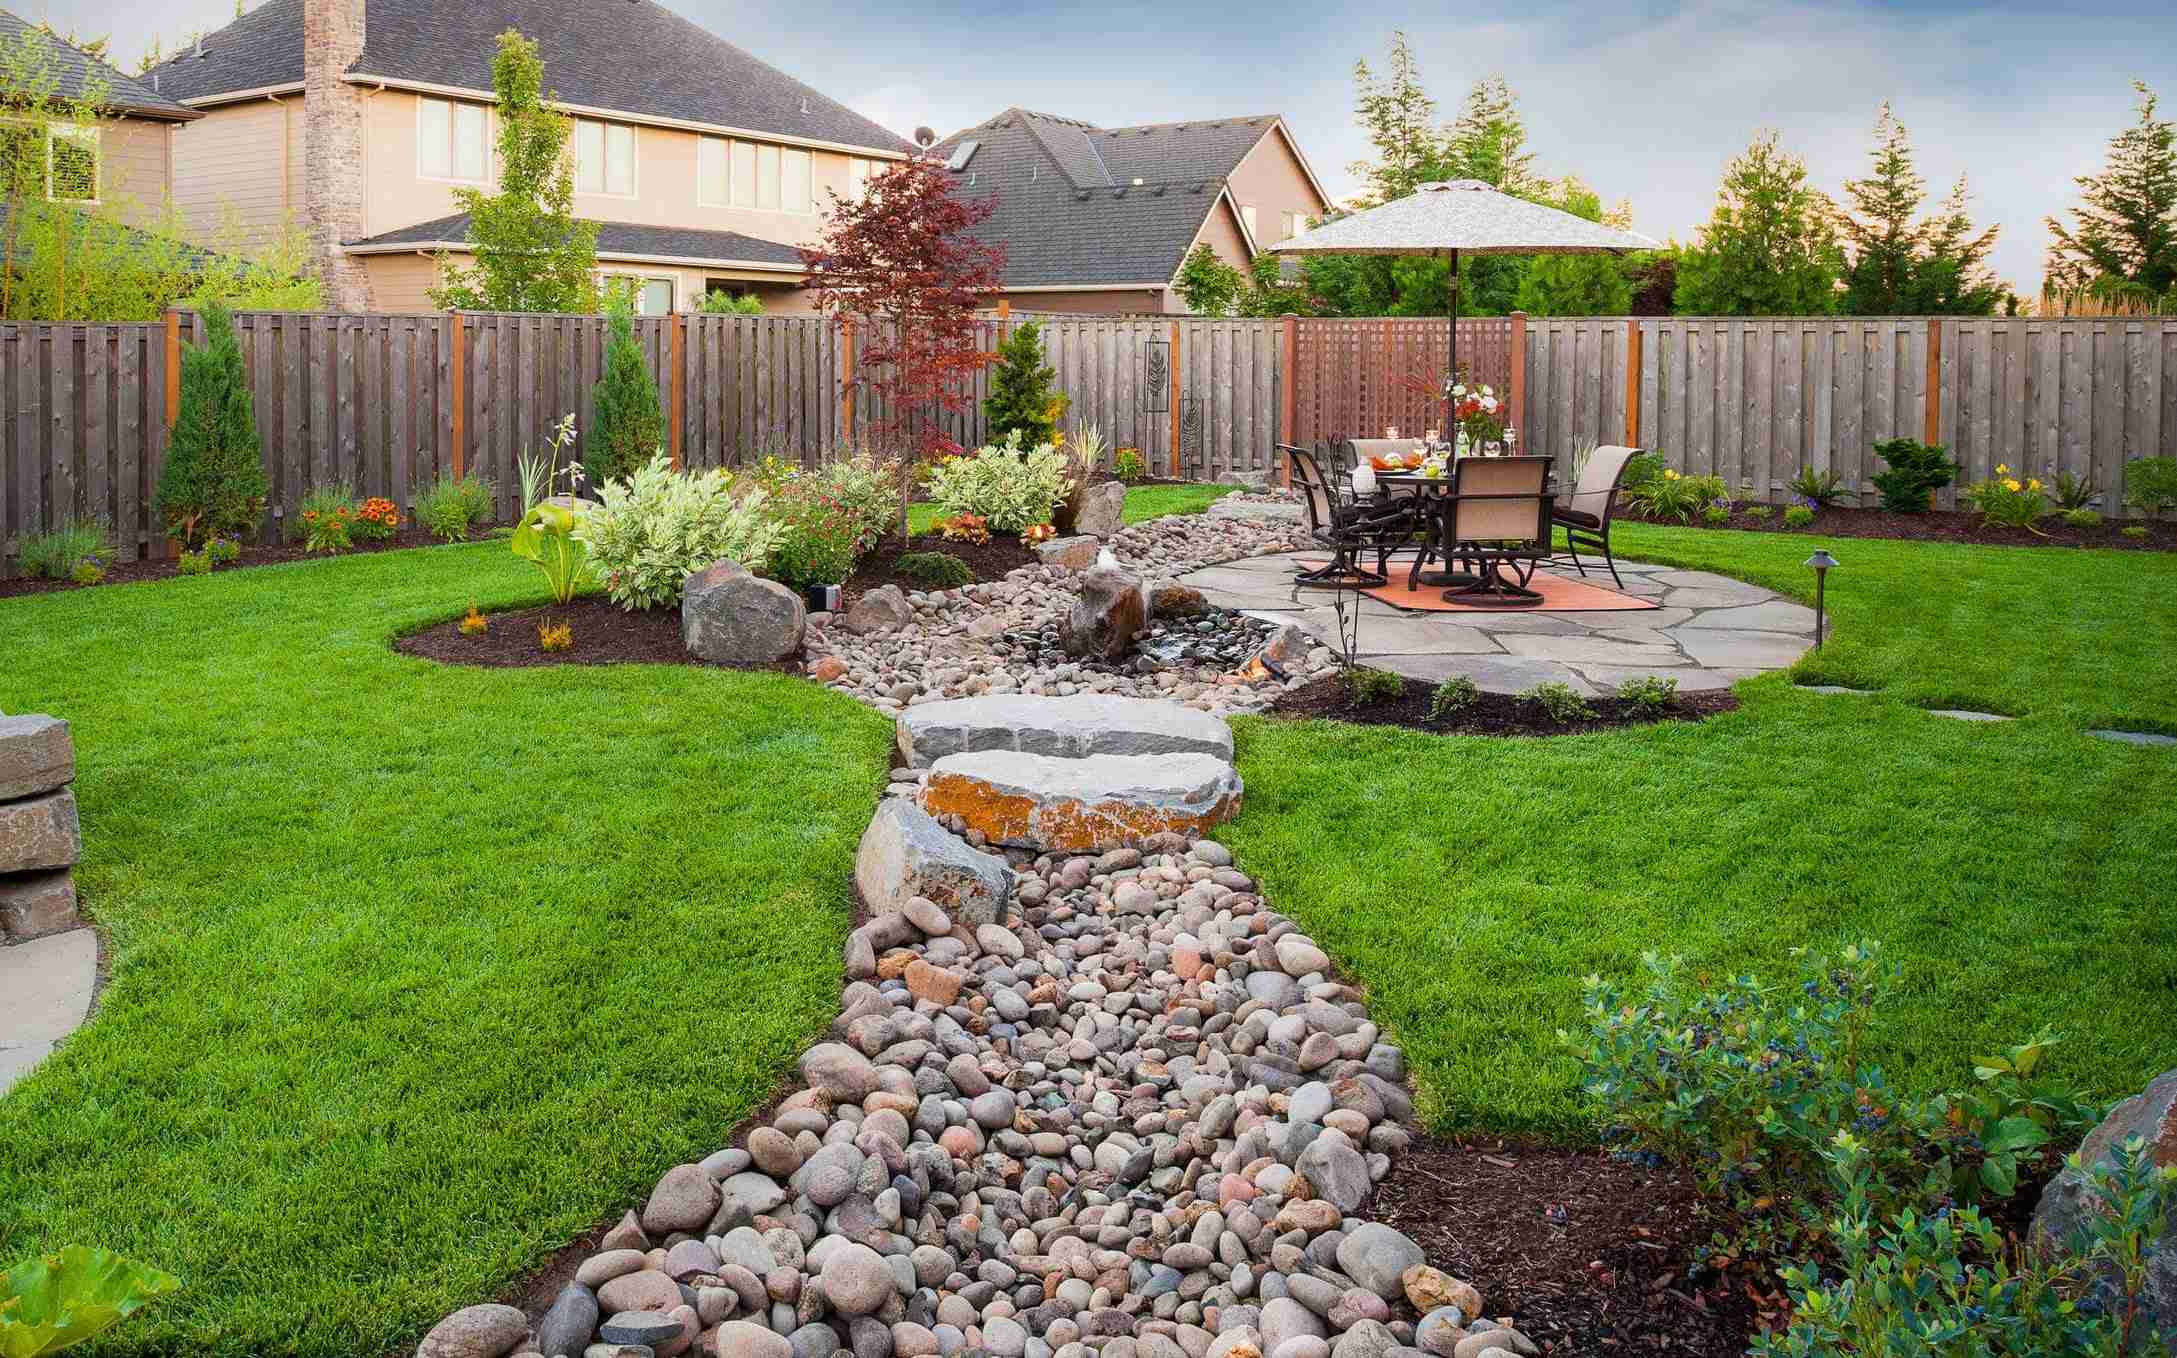 How To Install French Drain In Backyard